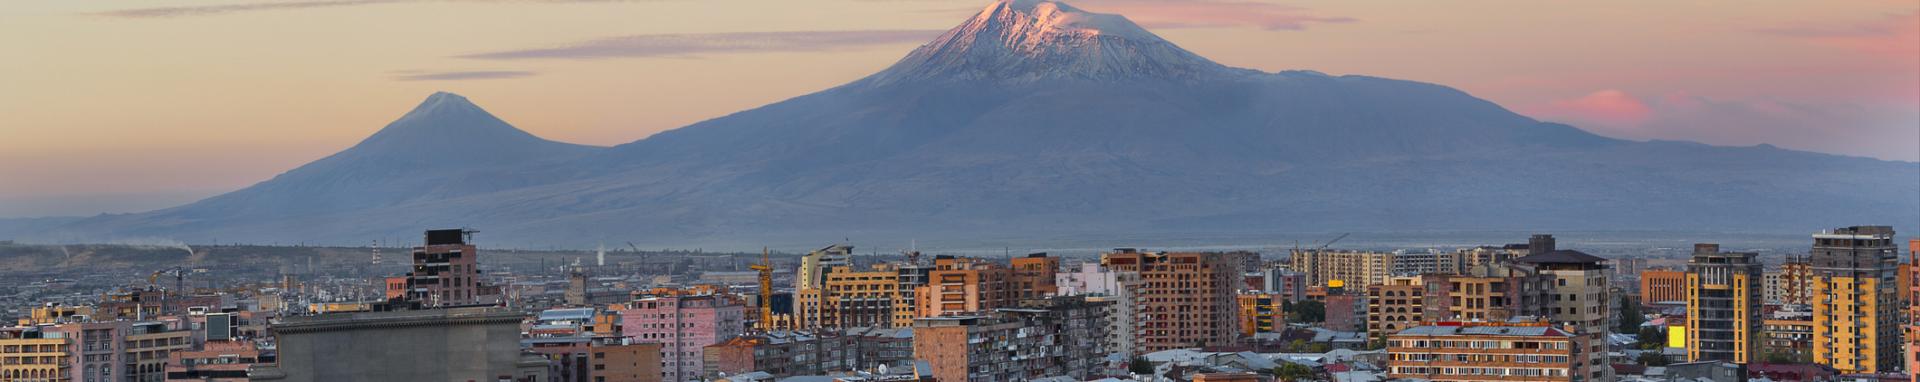 City in Armenia with mountain in background